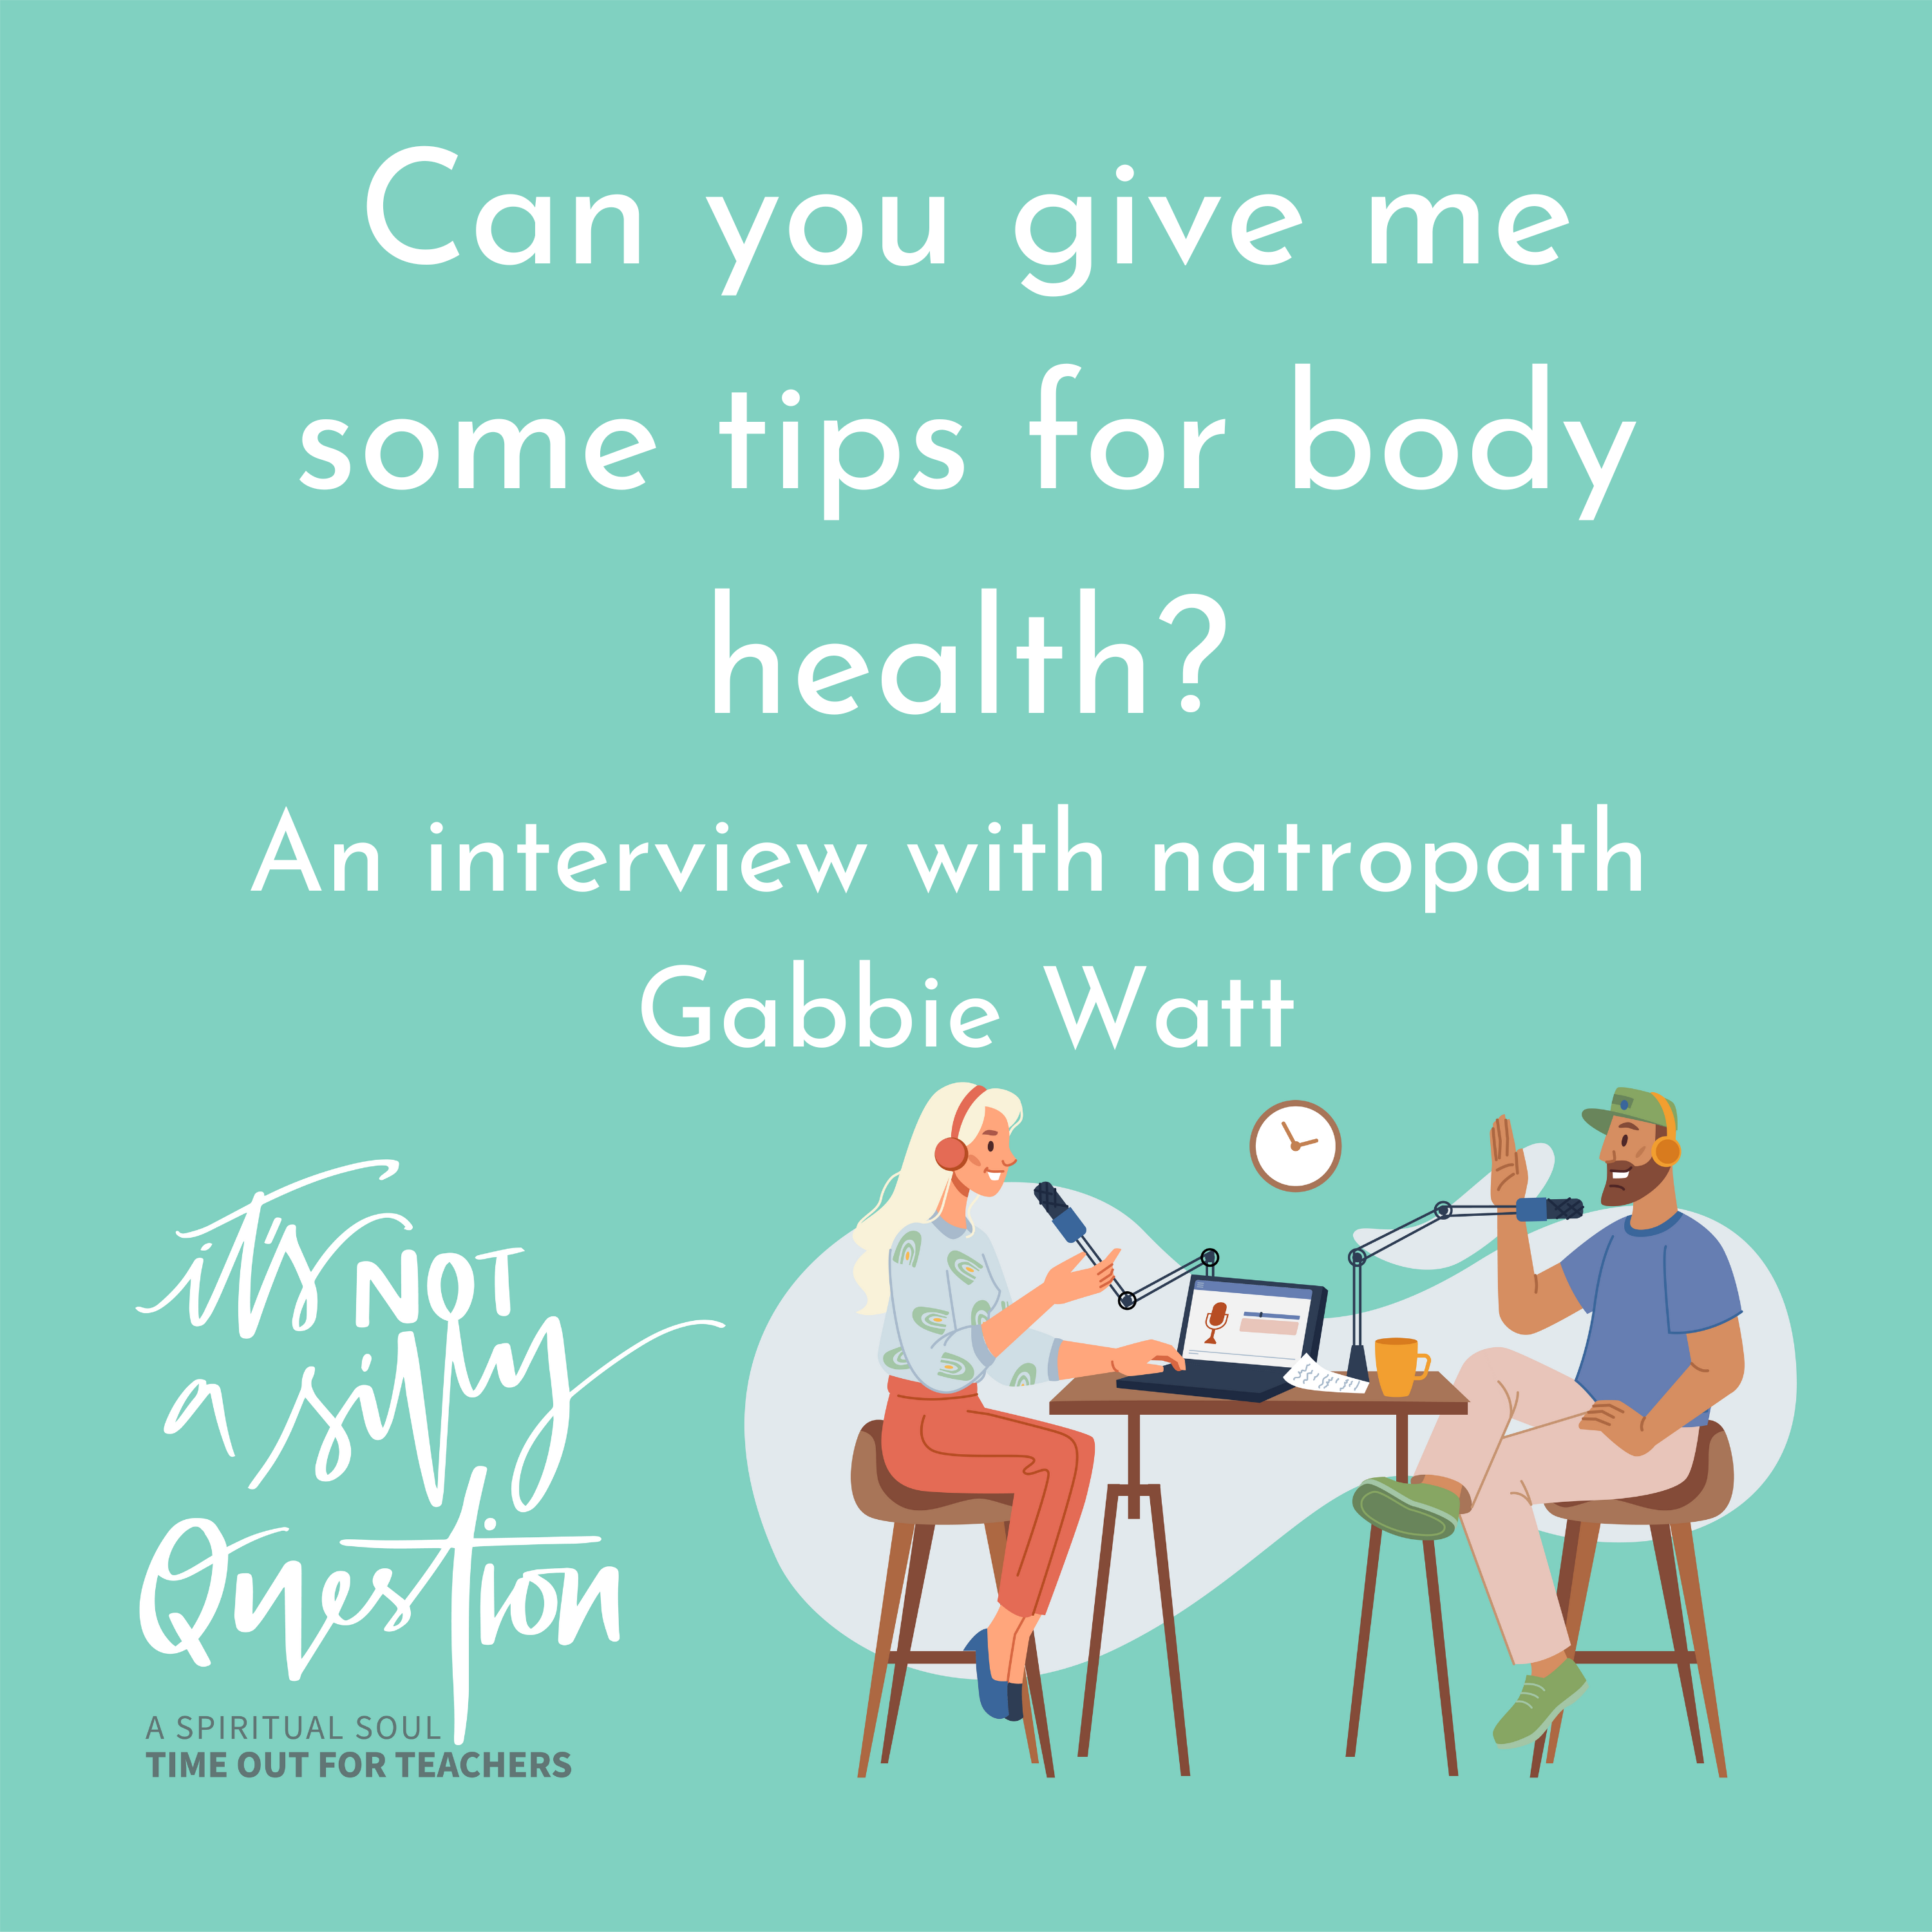 Can you give me some simple tips for body health? (With Natropath Gabbie Watt)